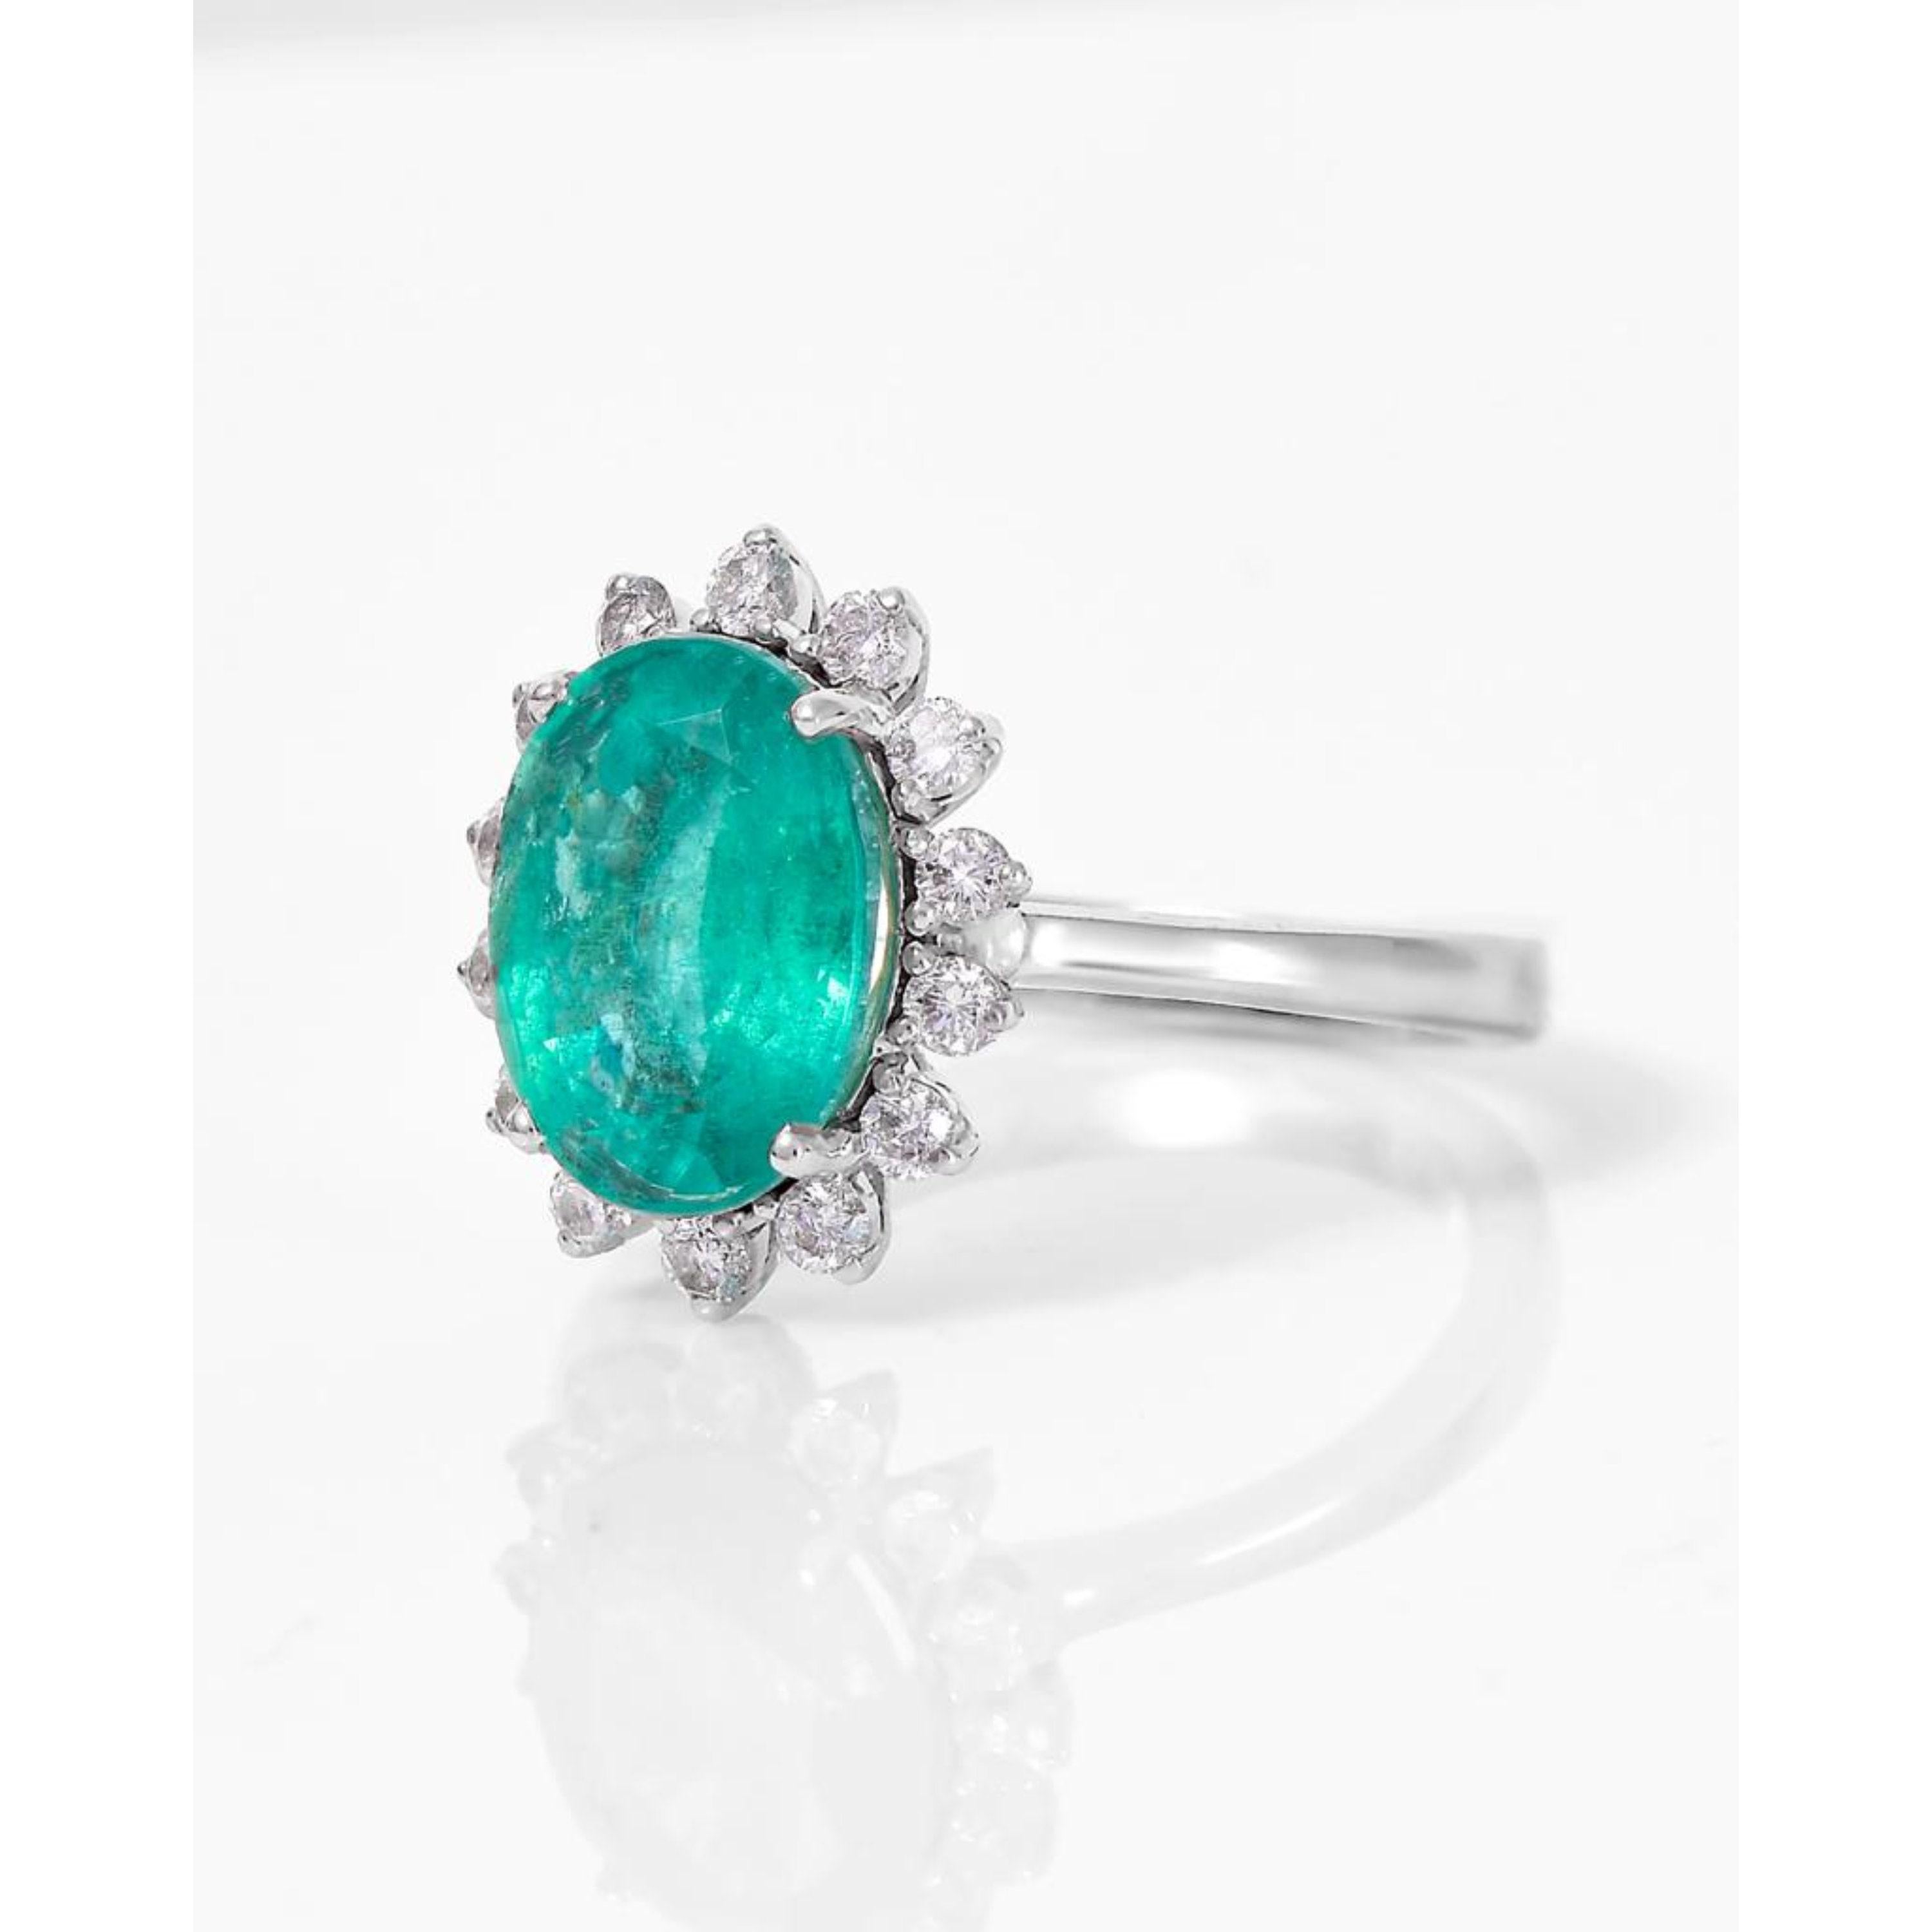 For Sale:  White Gold 3 Carat Emerald Engagement Ring, Unique Emerald Diamond Wedding Ring 2